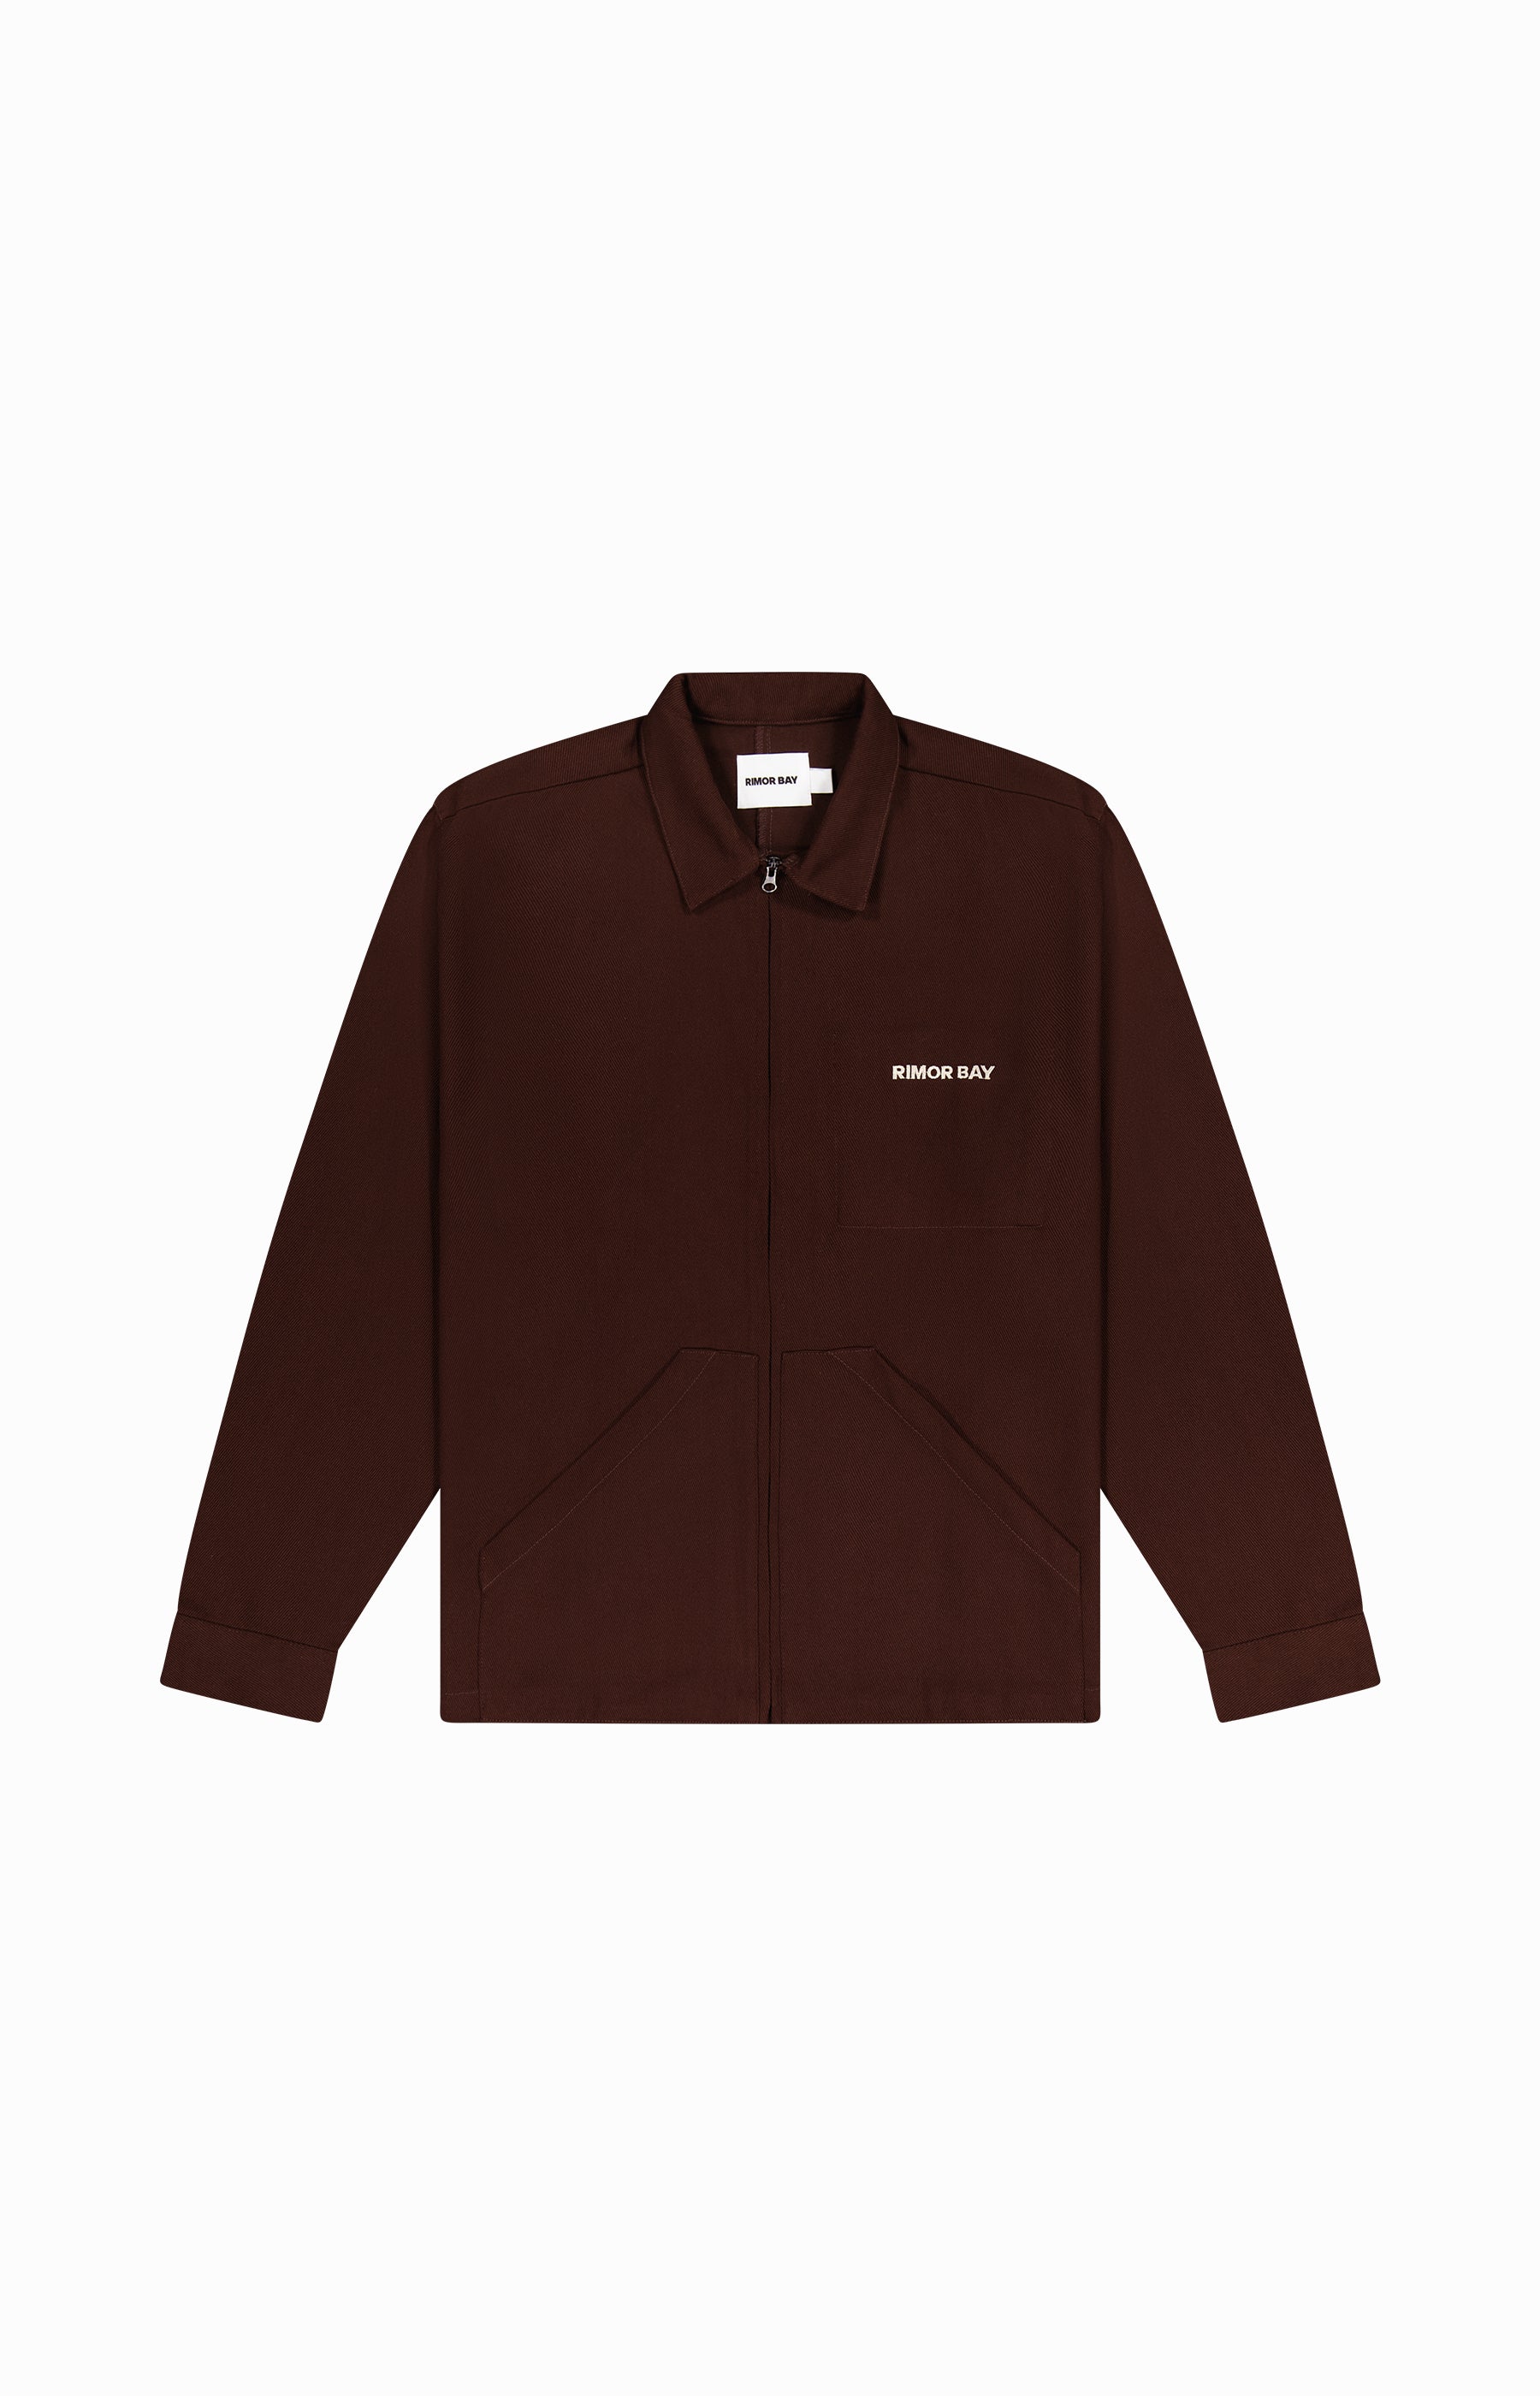 brown long sleeve zip up jacket with logo on chest and pockets